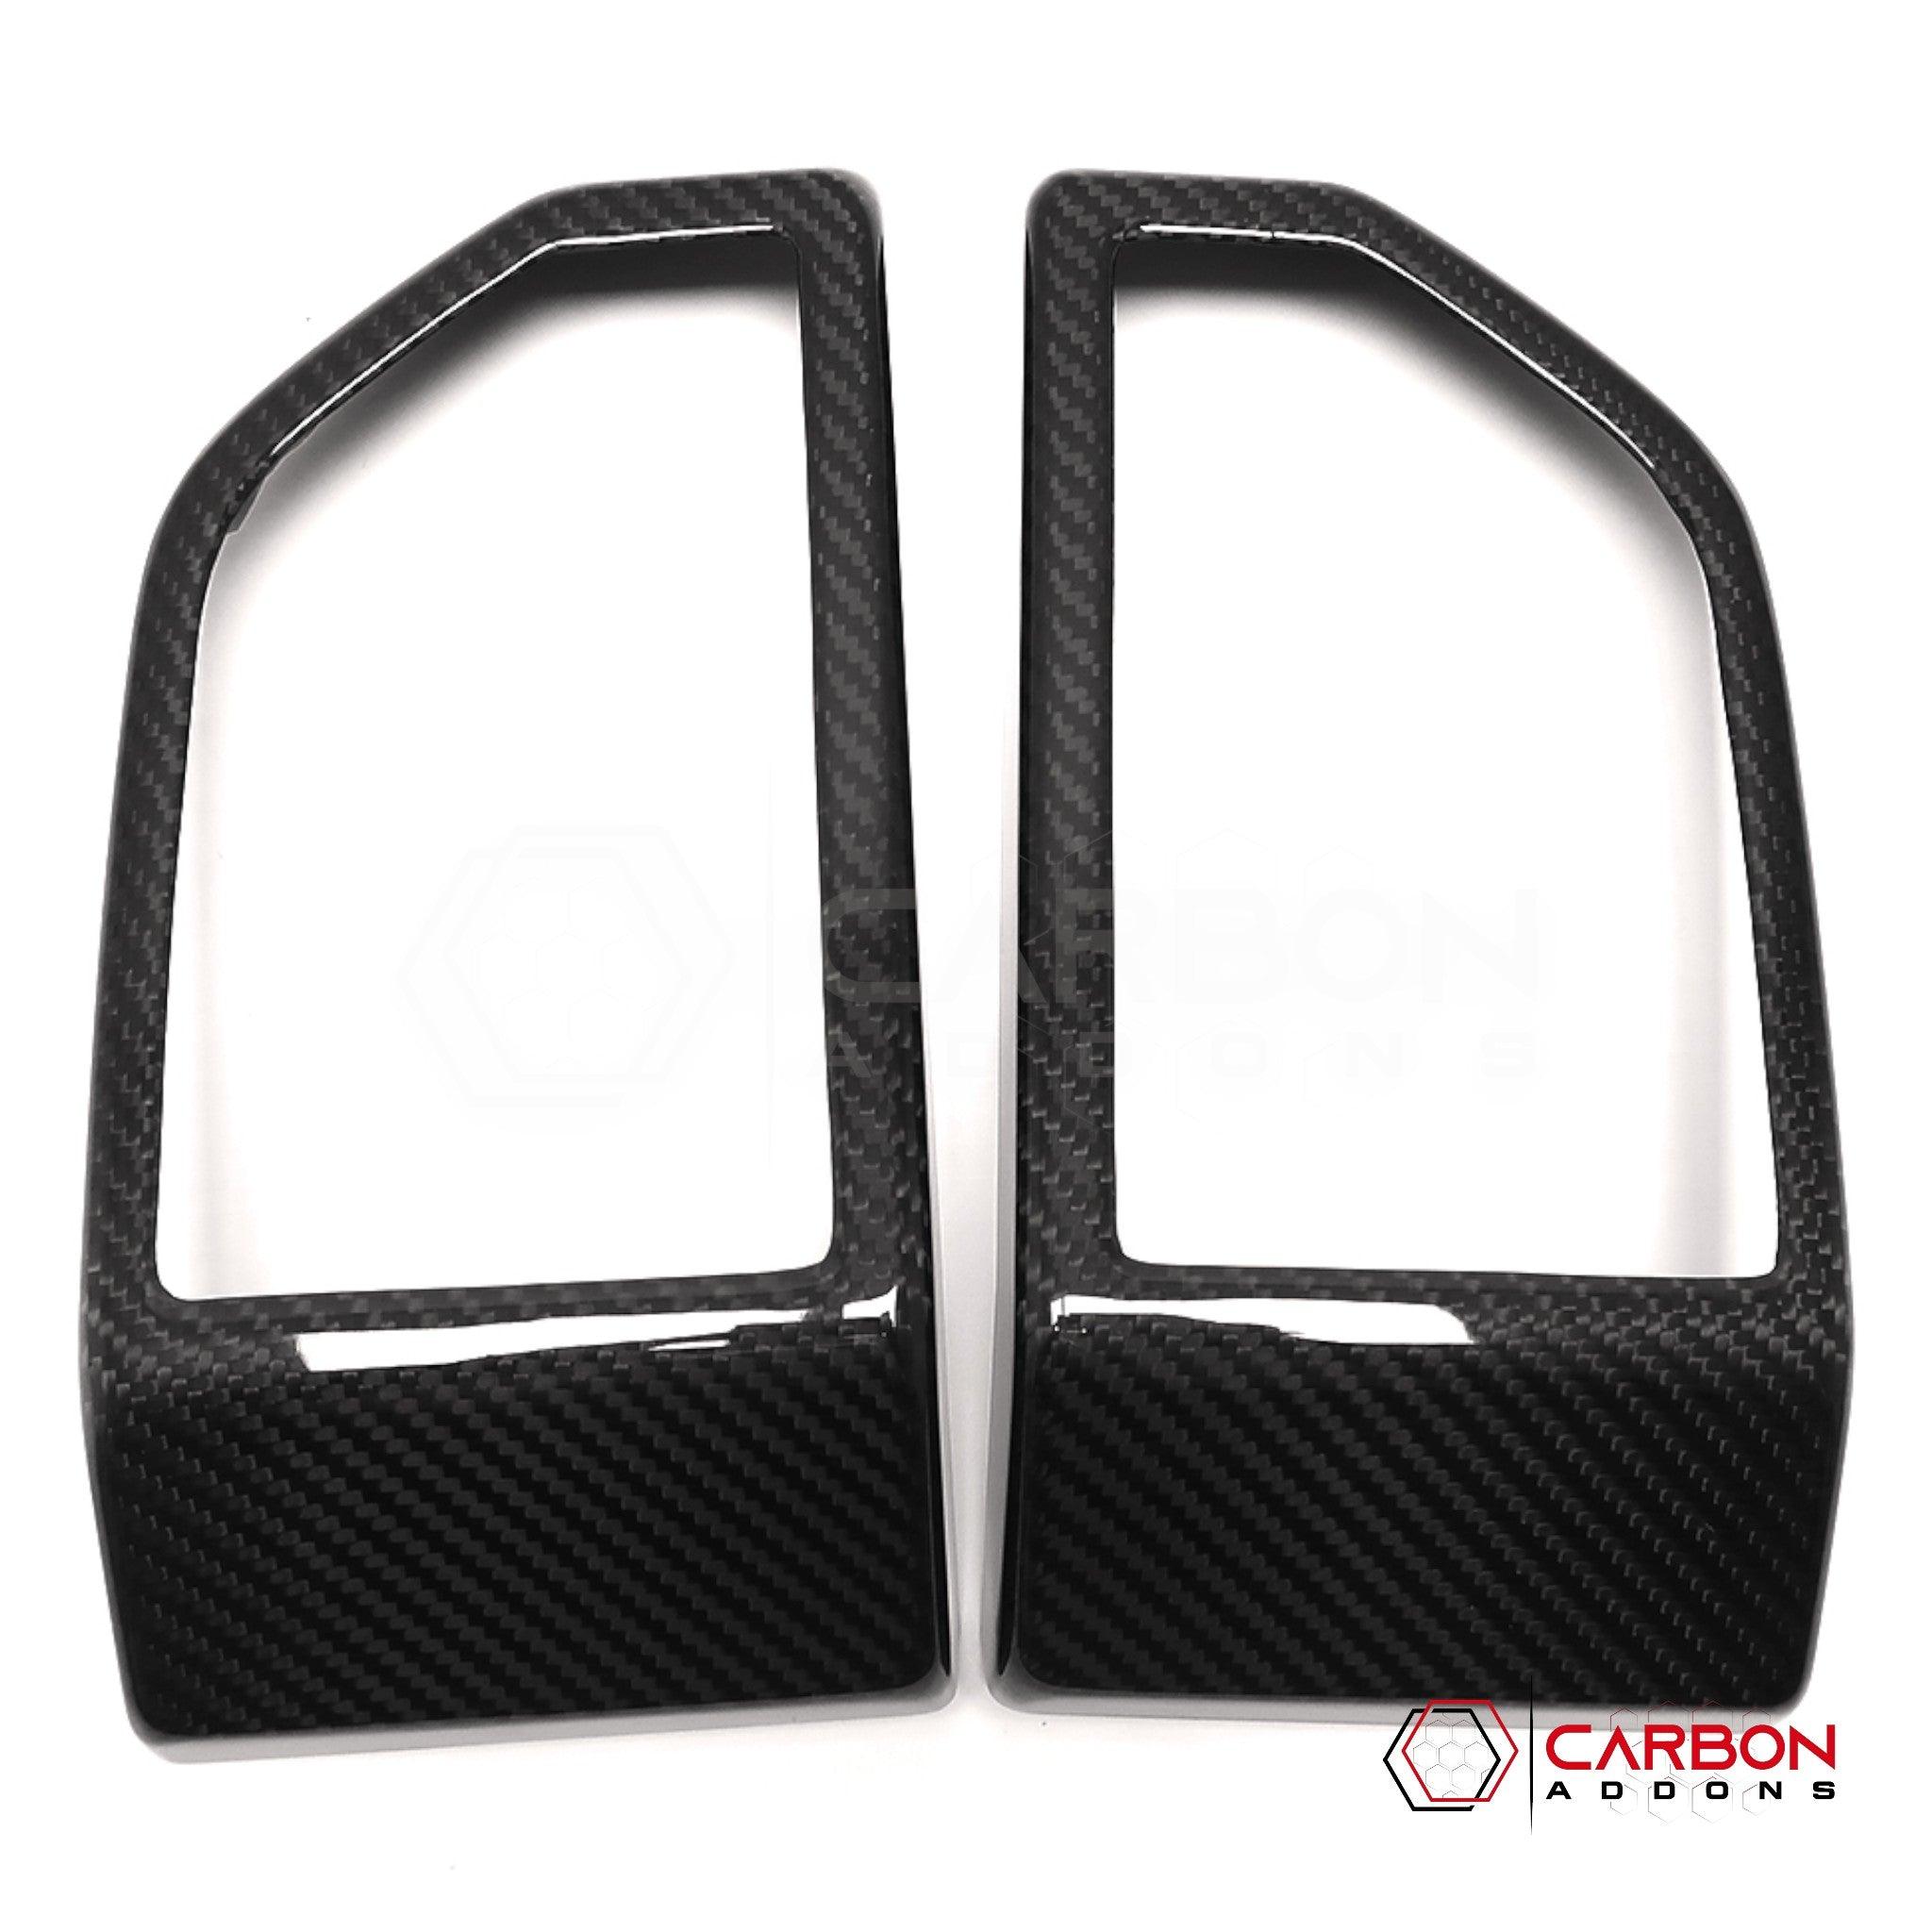 [Coming Soon] Ford F150 2015-2020 Dashboard Side AC Vents Trim Hard Carbon Fiber Cover - carbonaddons Carbon Fiber Parts, Accessories, Upgrades, Mods